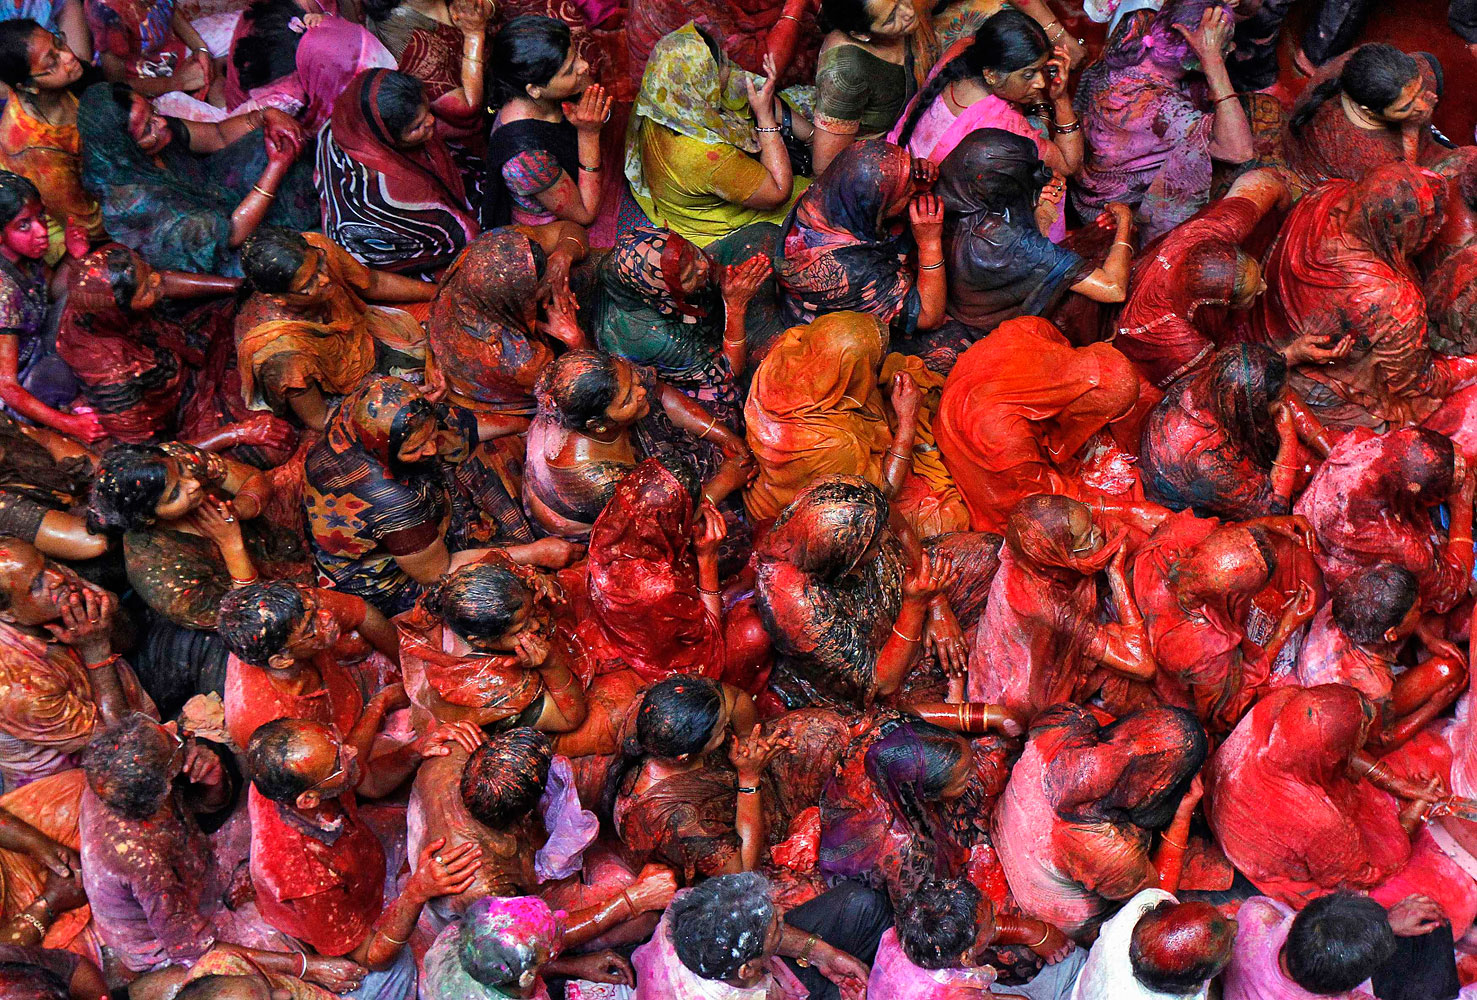 Hindu devotees daubed in colours sit as they sing hymns during Holi celebrations at Shamlal Ji temple in Kolkata, March 17, 2014.